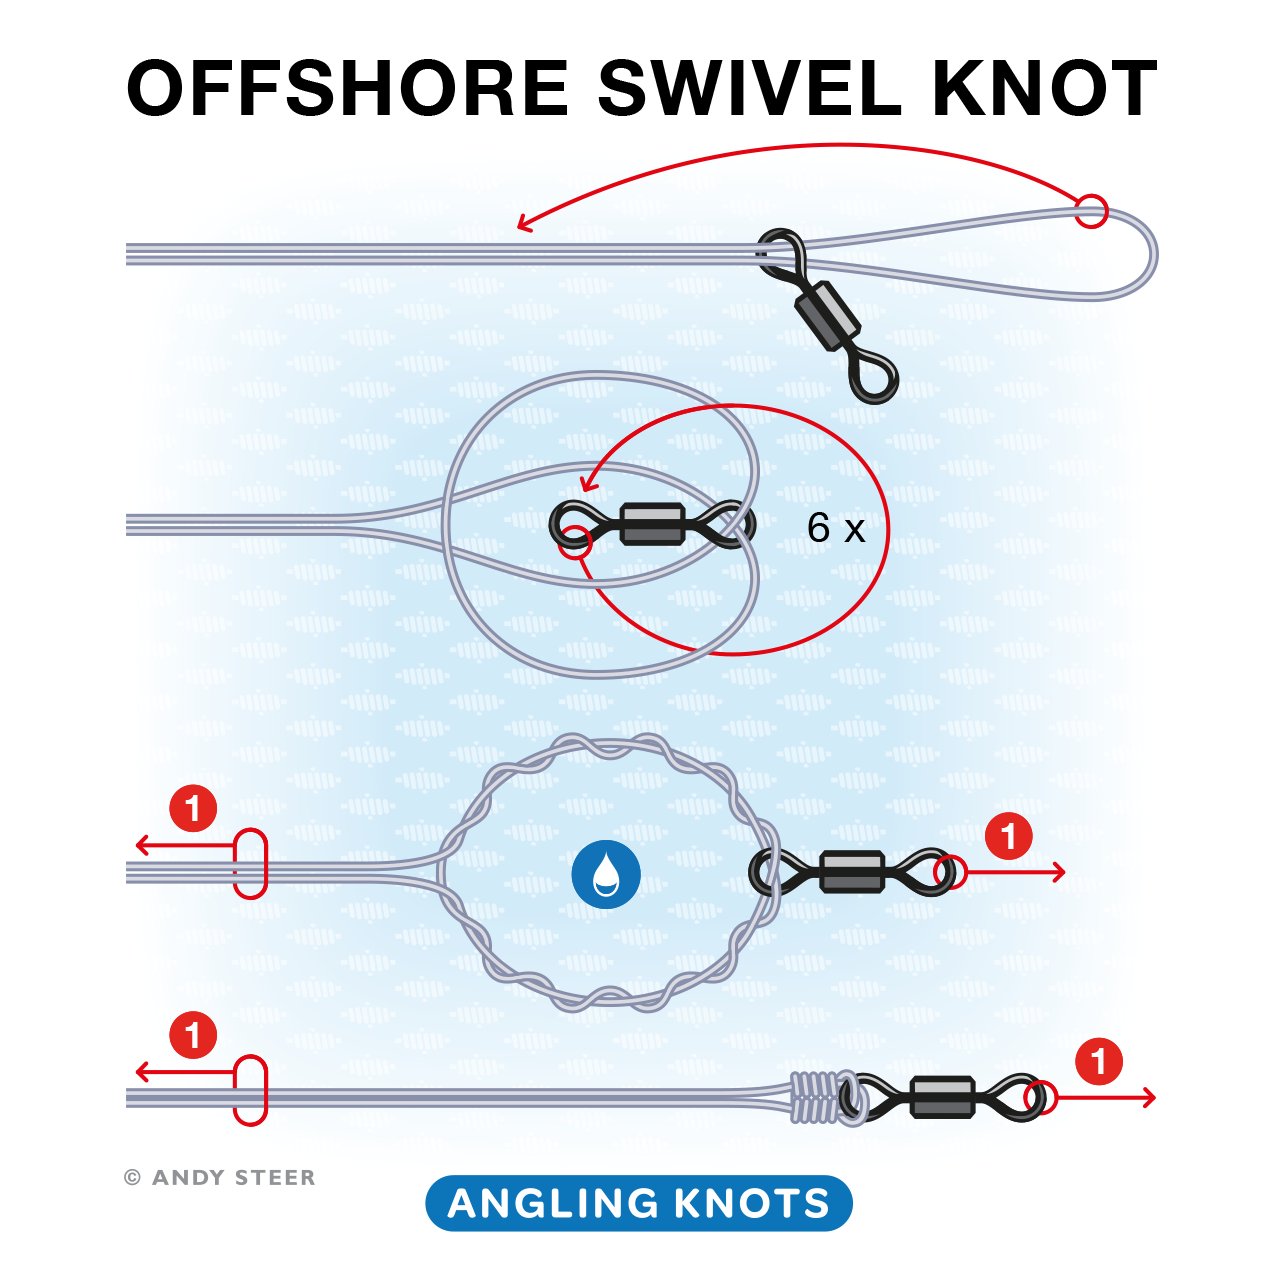 Andy Steer on X: The offshore swivel knot is used to connect a